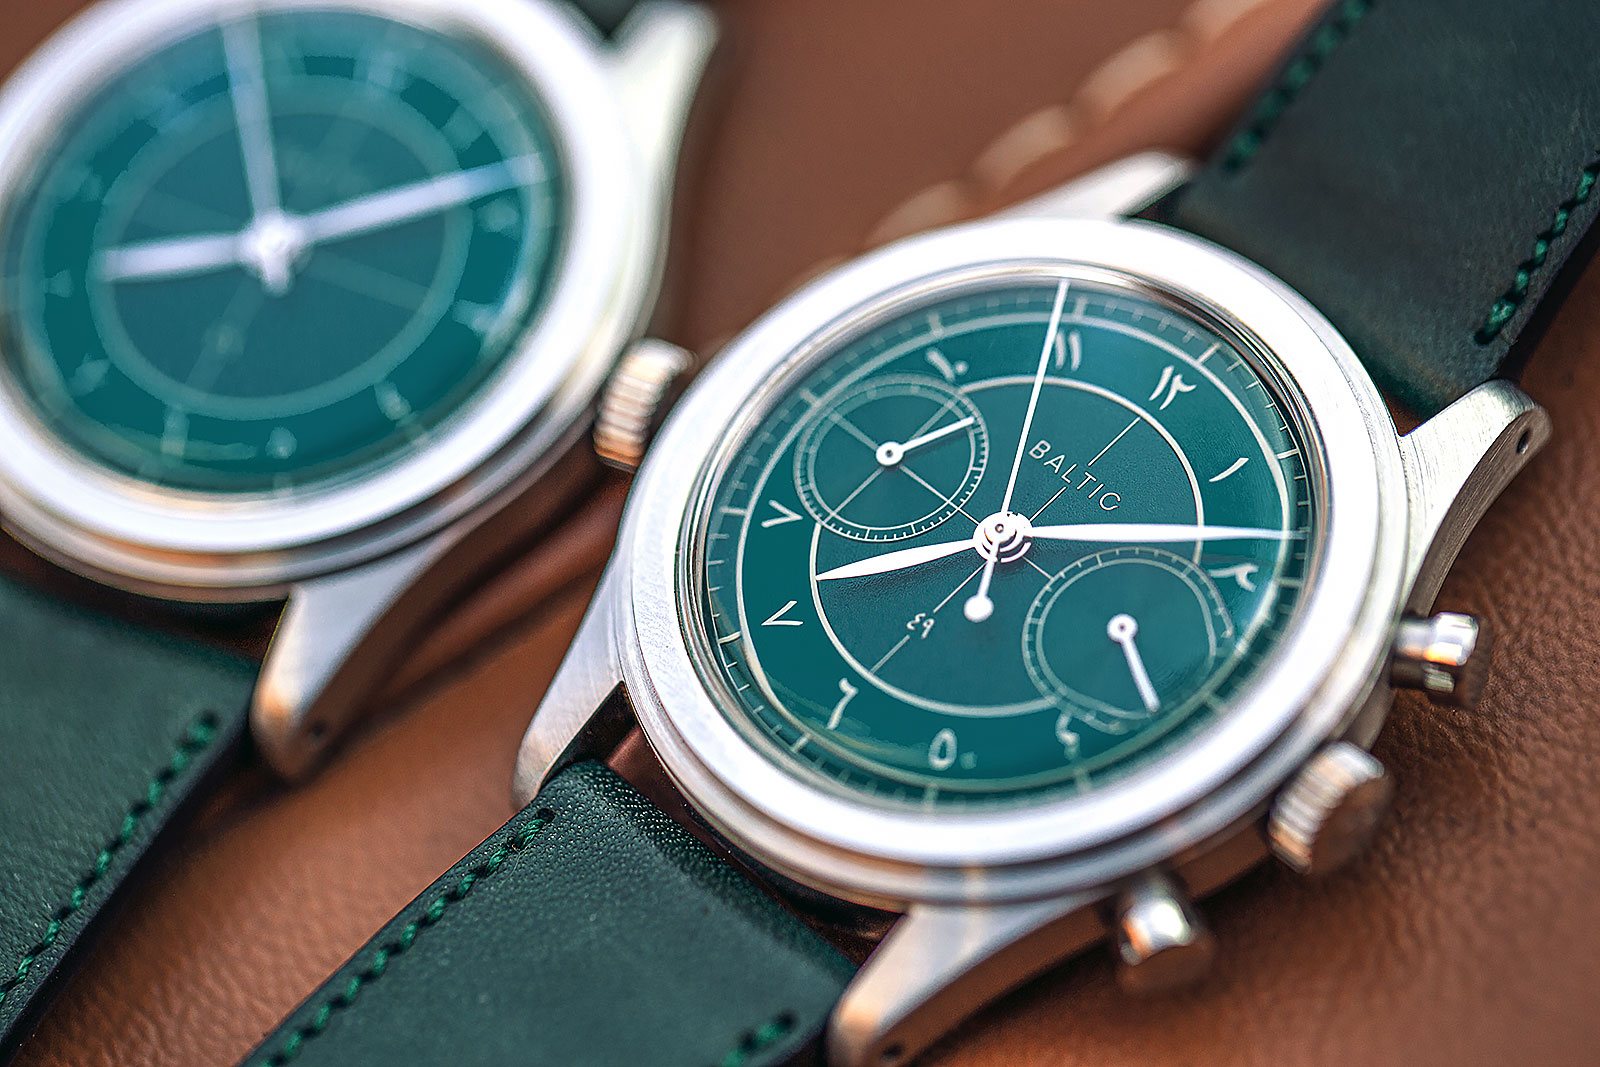 Baltic Introduces the HMS and Bicompax Perpétuel Editions | SJX Watches